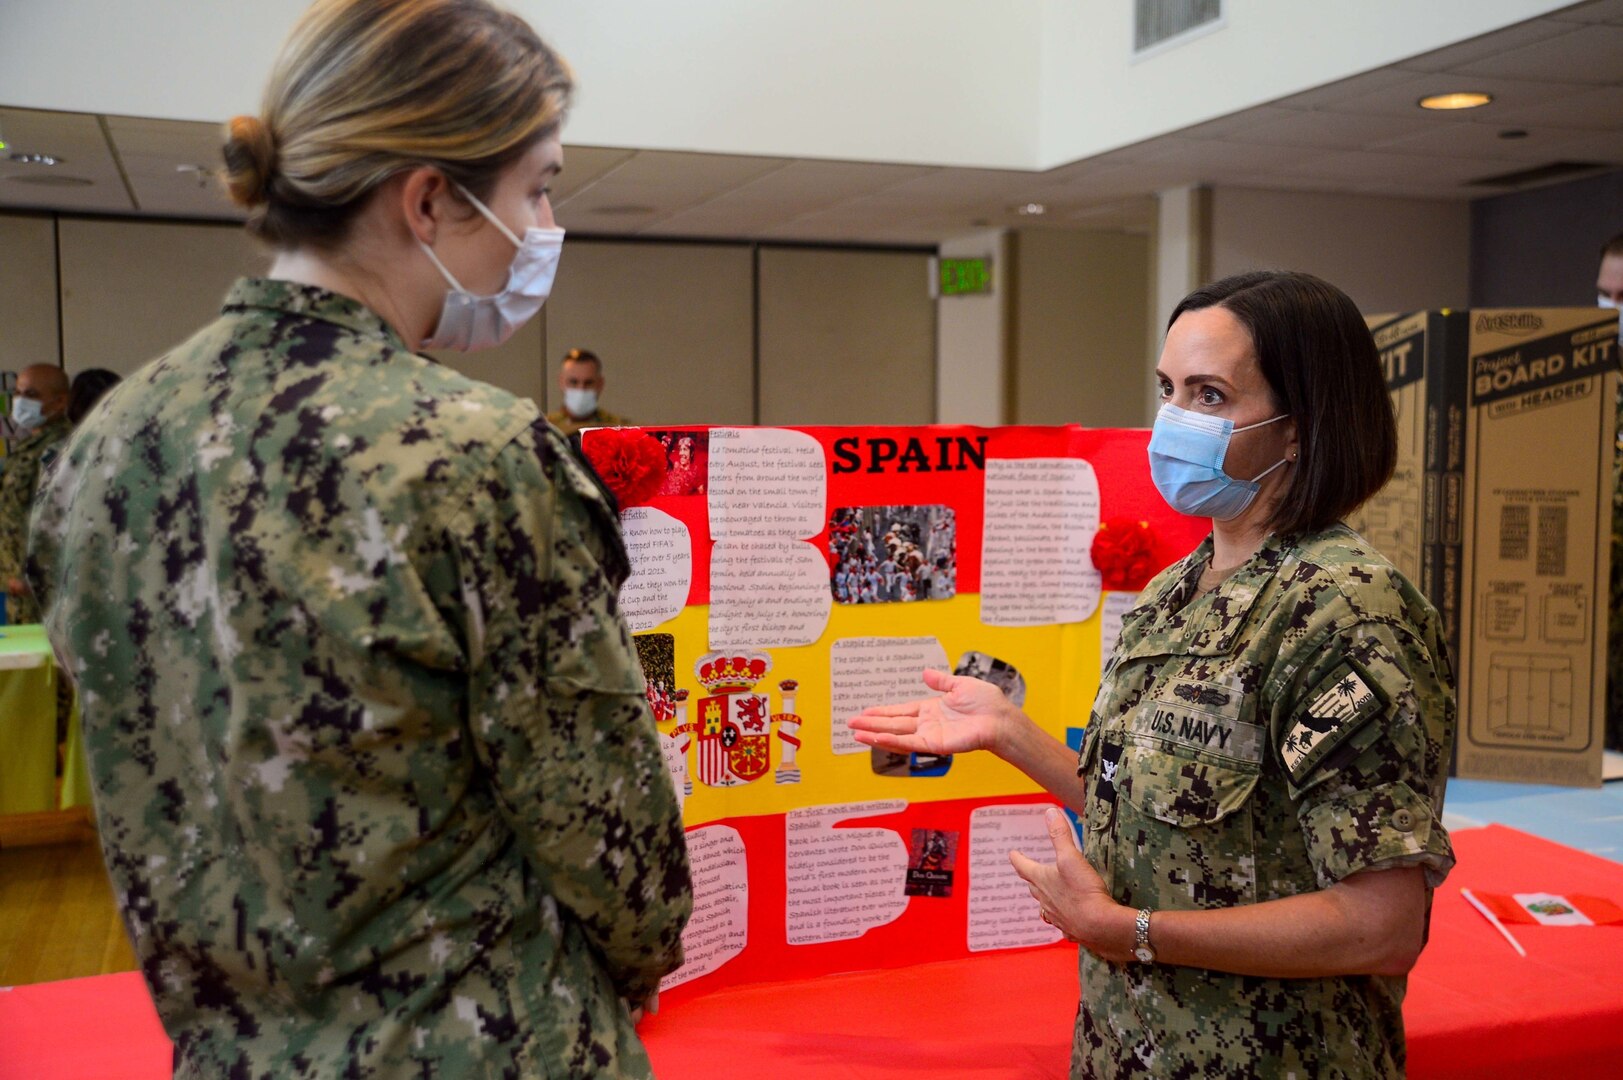 SAN DIEGO (Oct. 5, 2022) Capt. Kim Davis, Navy Medicine Readiness and Training Command San Diego’s commanding officer (right), speaks with NMRTC San Diego’s Diversity Committee Team during a Hispanic Heritage Month event at the hospital, Oct. 5 2022. NMRTC San Diego's mission is to prepare service members to deploy in support of operational forces, deliver high quality healthcare services and shape the future of military medicine through education, training and research. NMRTC San Diego employs more than 6,000 active duty military personnel, civilians and contractors in Southern California to provide patients with world-class care anytime, anywhere. (U.S. Navy photo by Mass Communication Specialist 3rd Class Raphael McCorey)